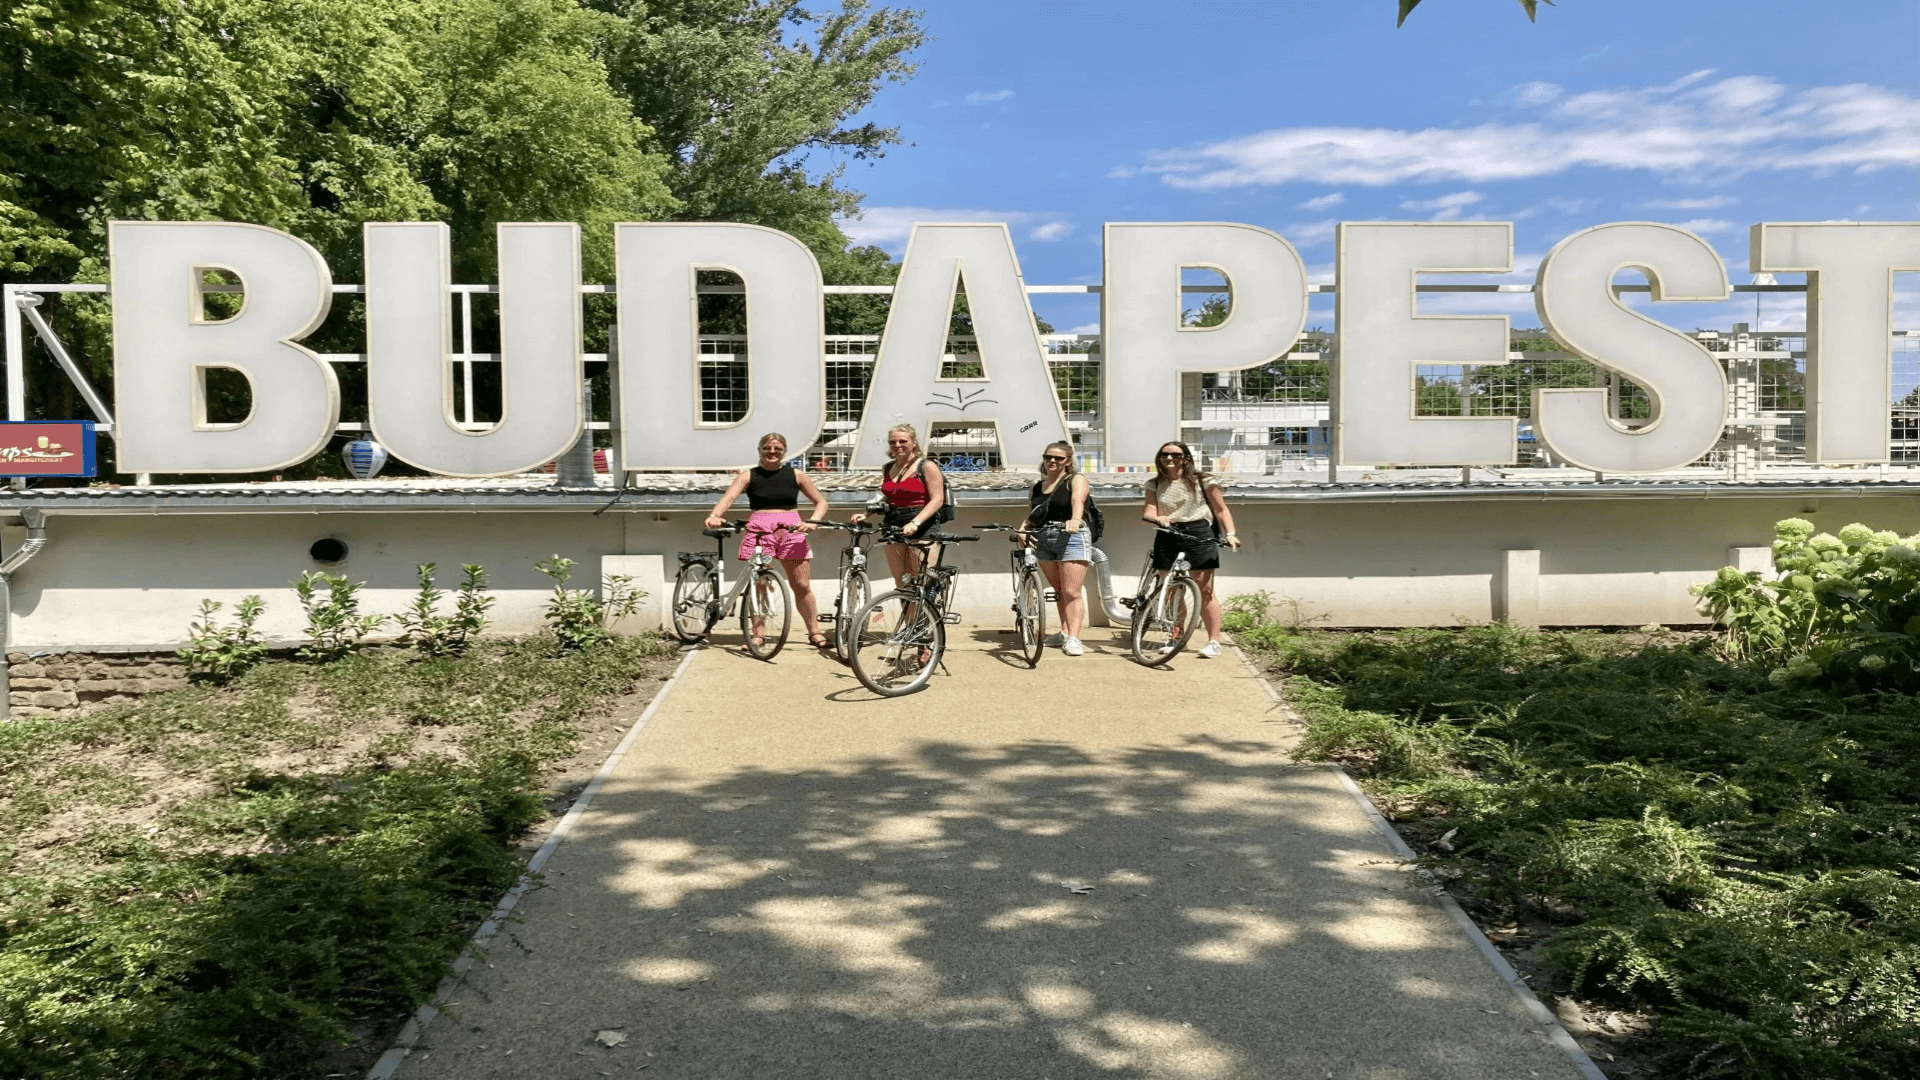 4 people standing in front of a Budapest sign